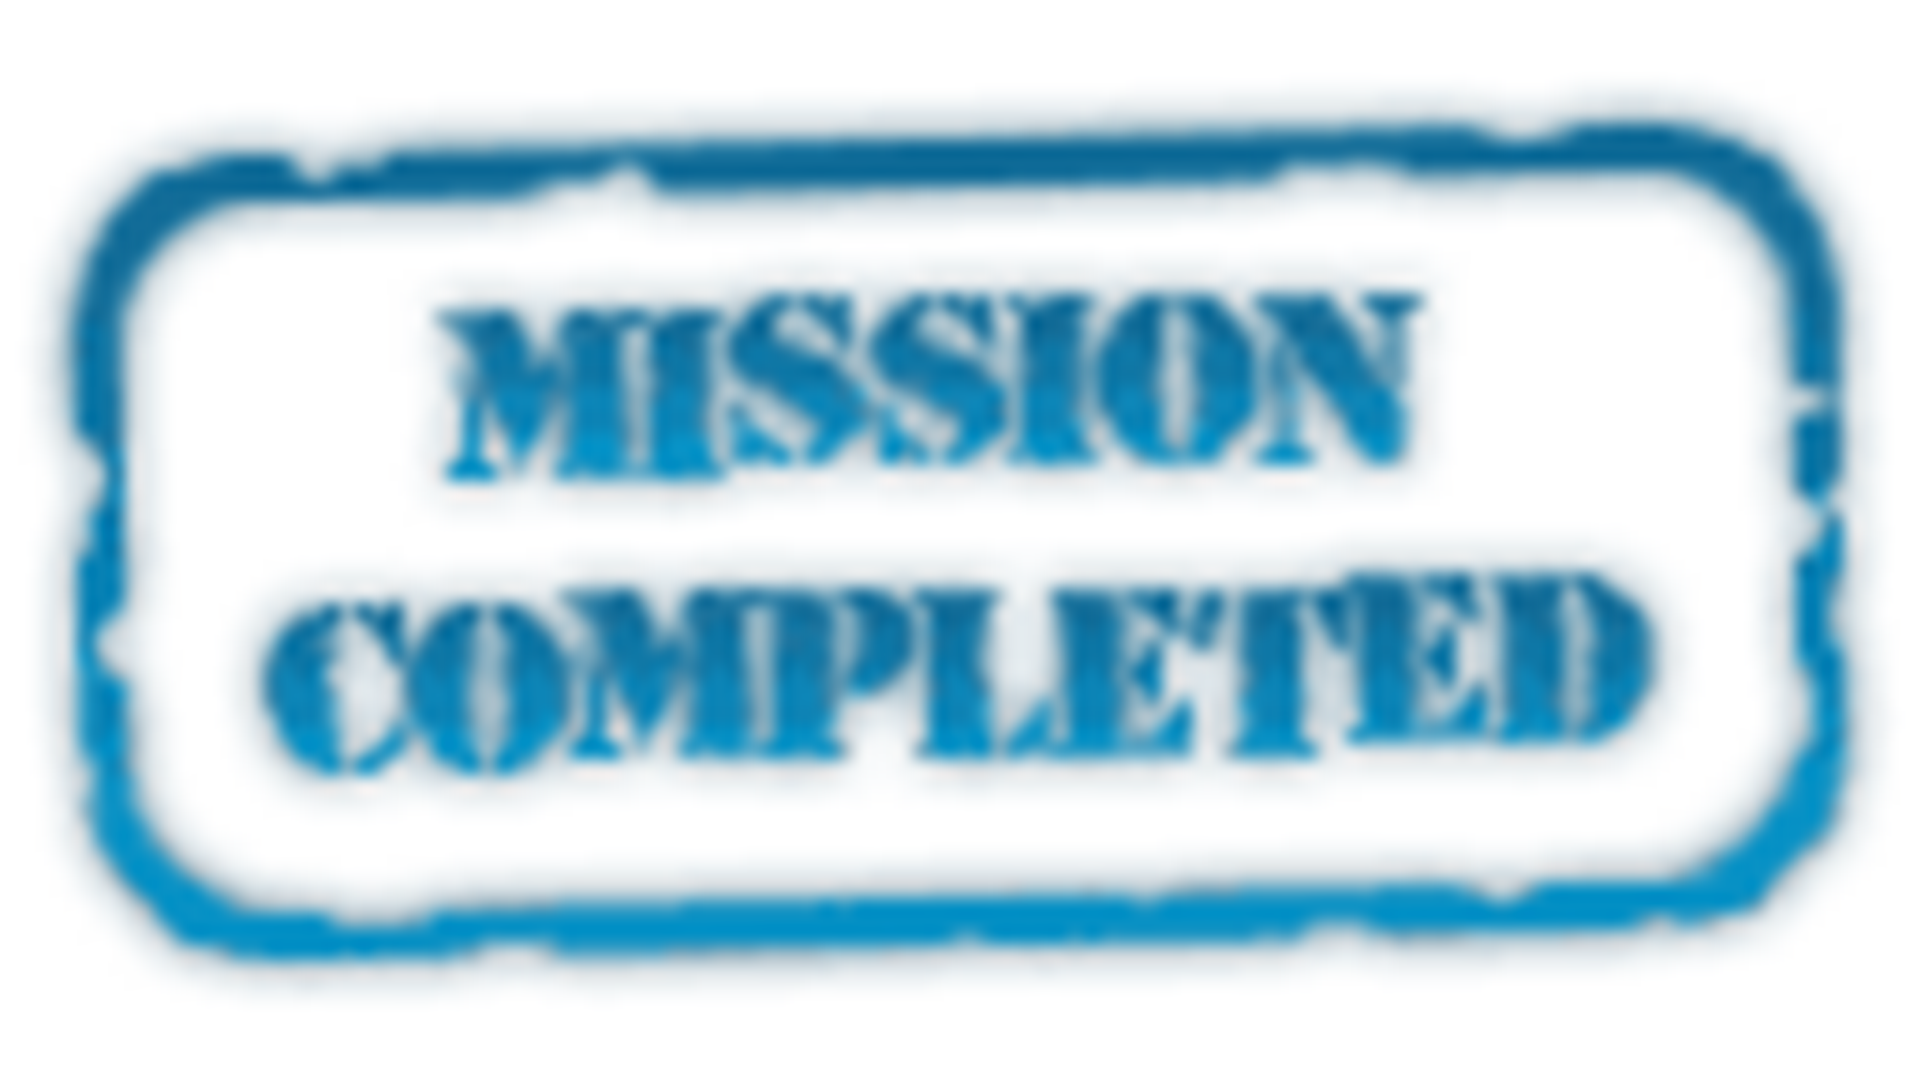 Mission 9 - Go on a Catamaran Cruise and drive the Cruising Vehicle- Completed